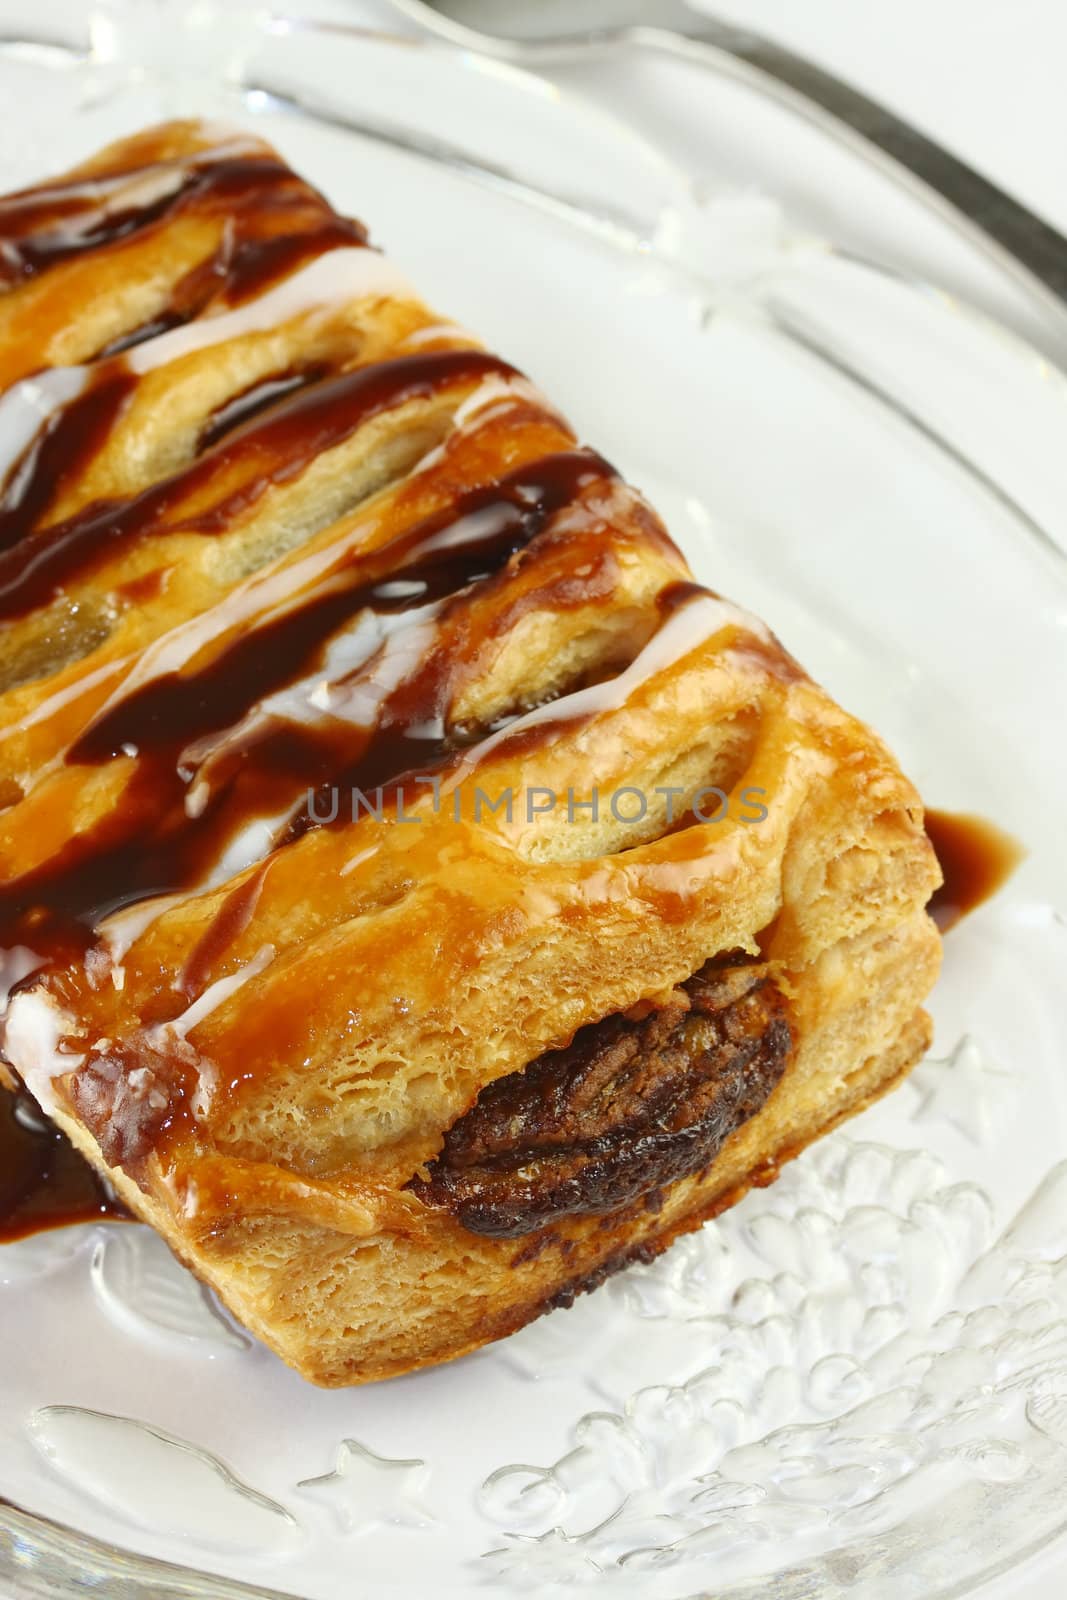 Chocolate Pastry, in the style of a strudel.